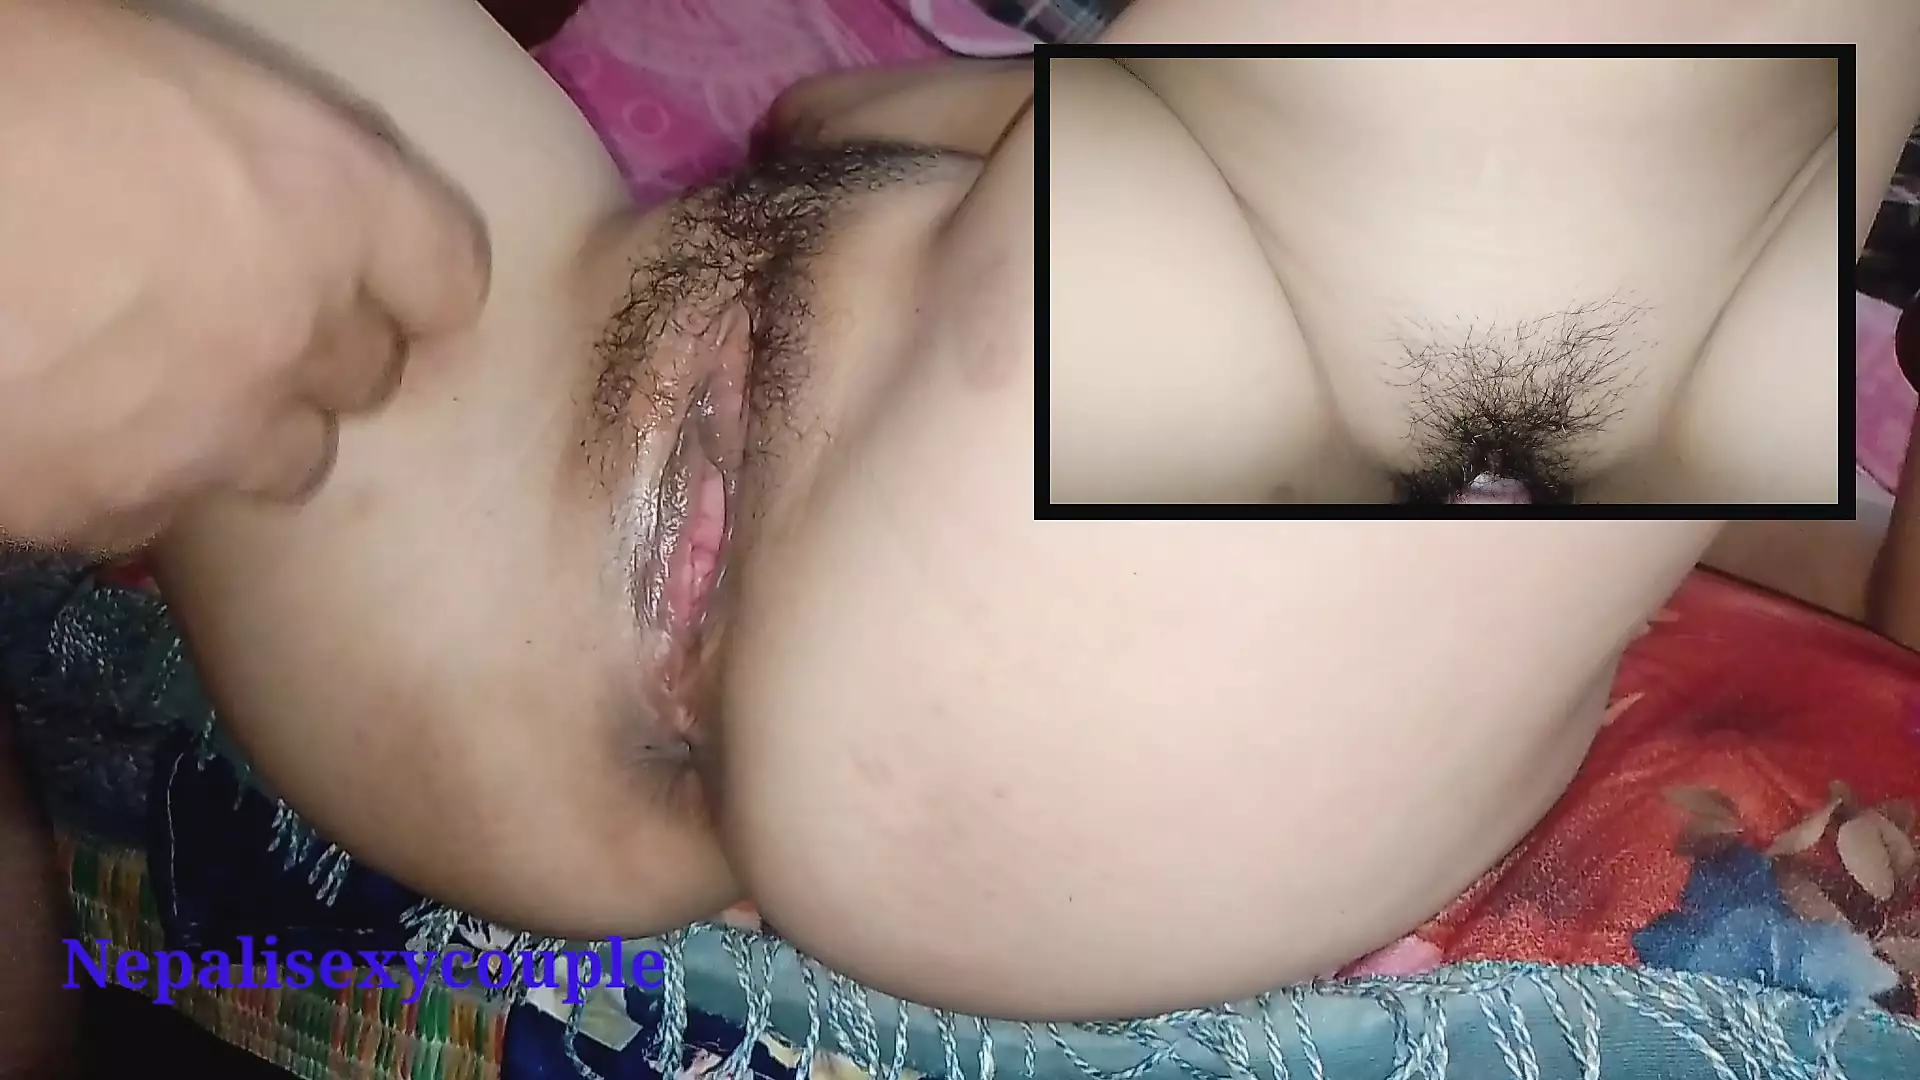 Nepali Sexy Couple In Hard Homemade Sex Video image